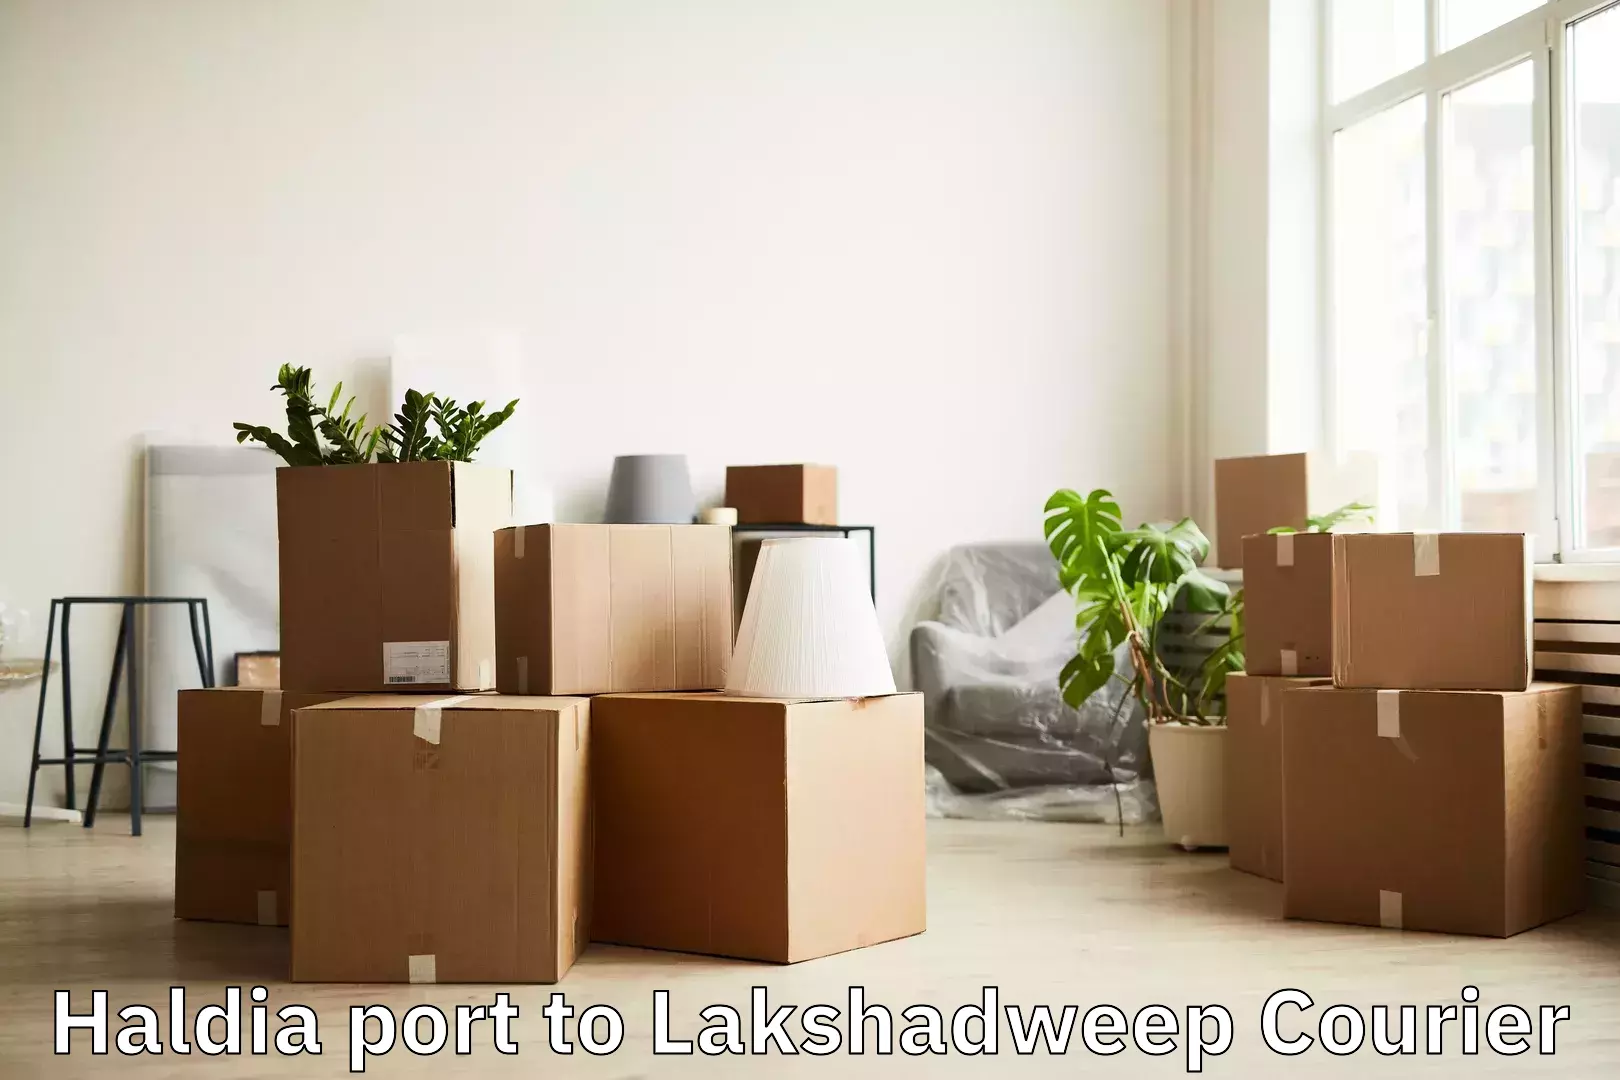 Luggage delivery system Haldia port to Lakshadweep